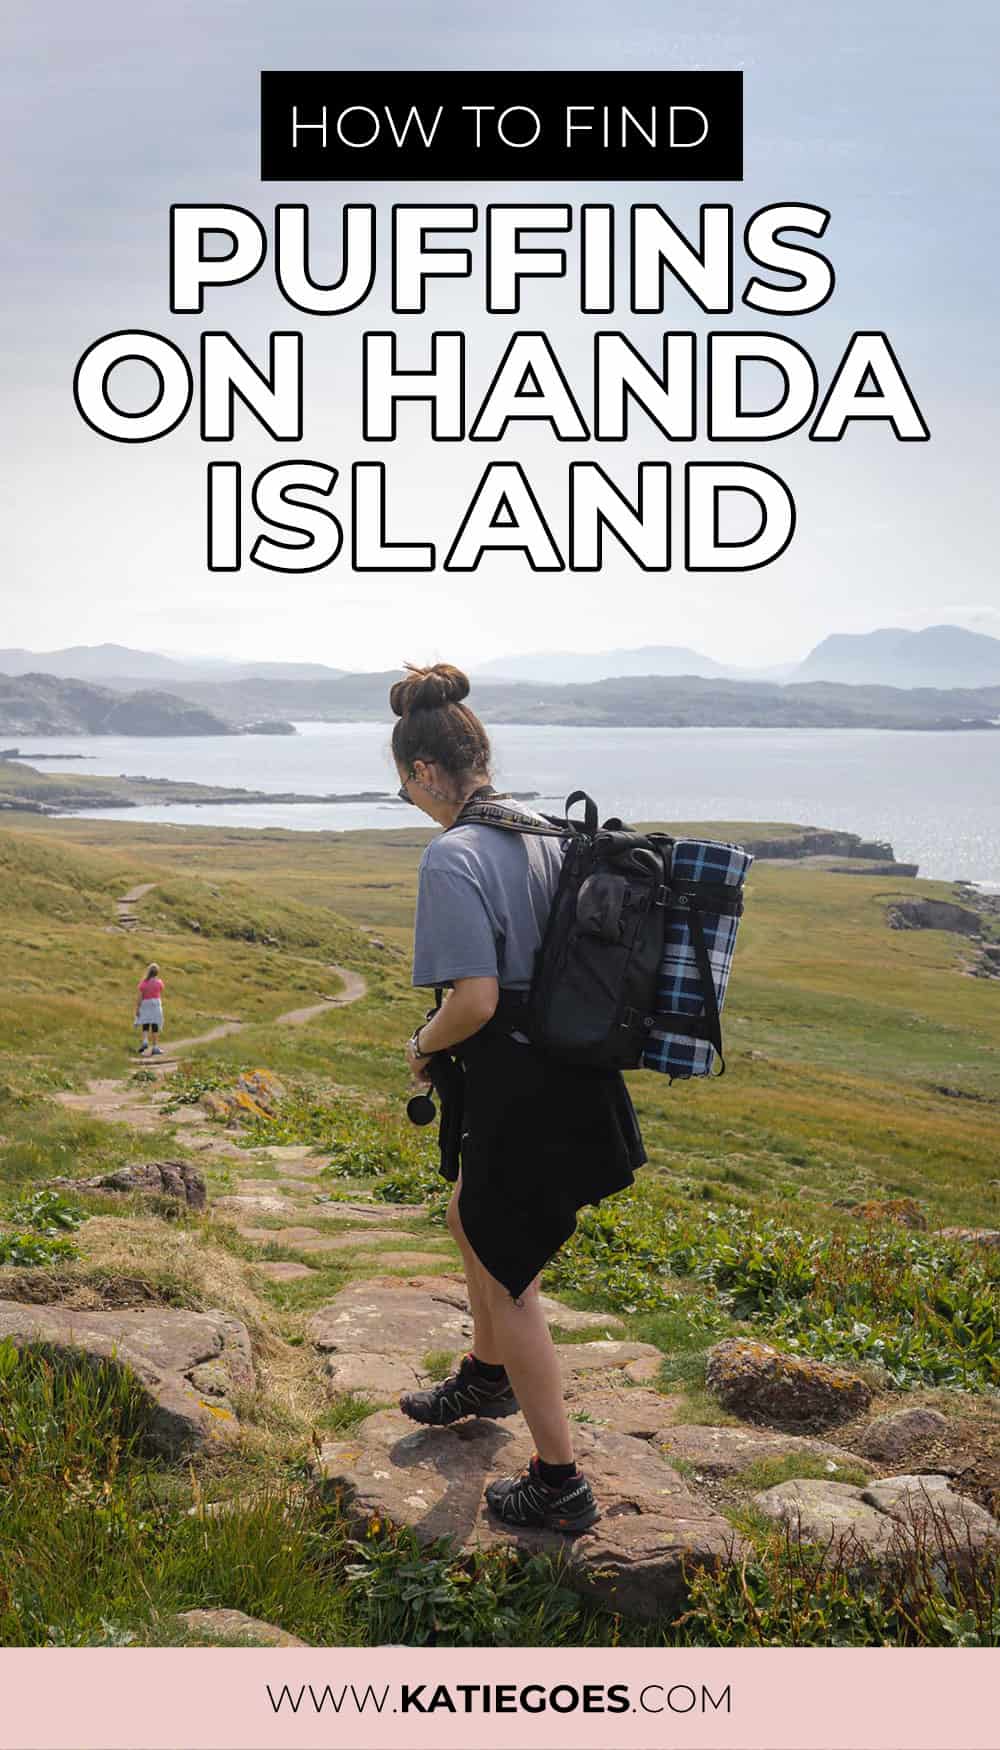 How to Find Puffins on Handa Island